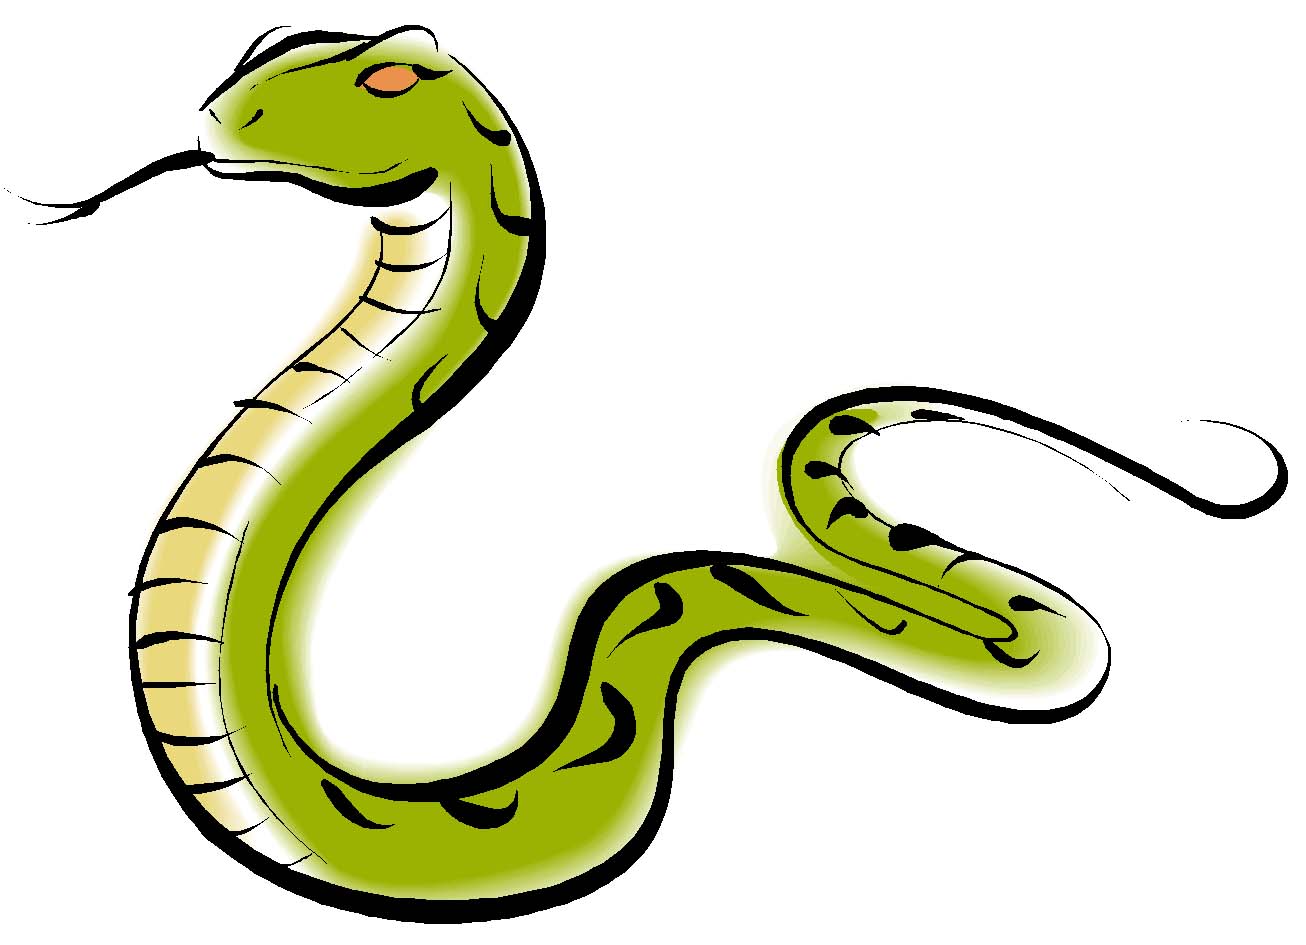 Cute Snake Clipart Black And White - Free Clipart ...